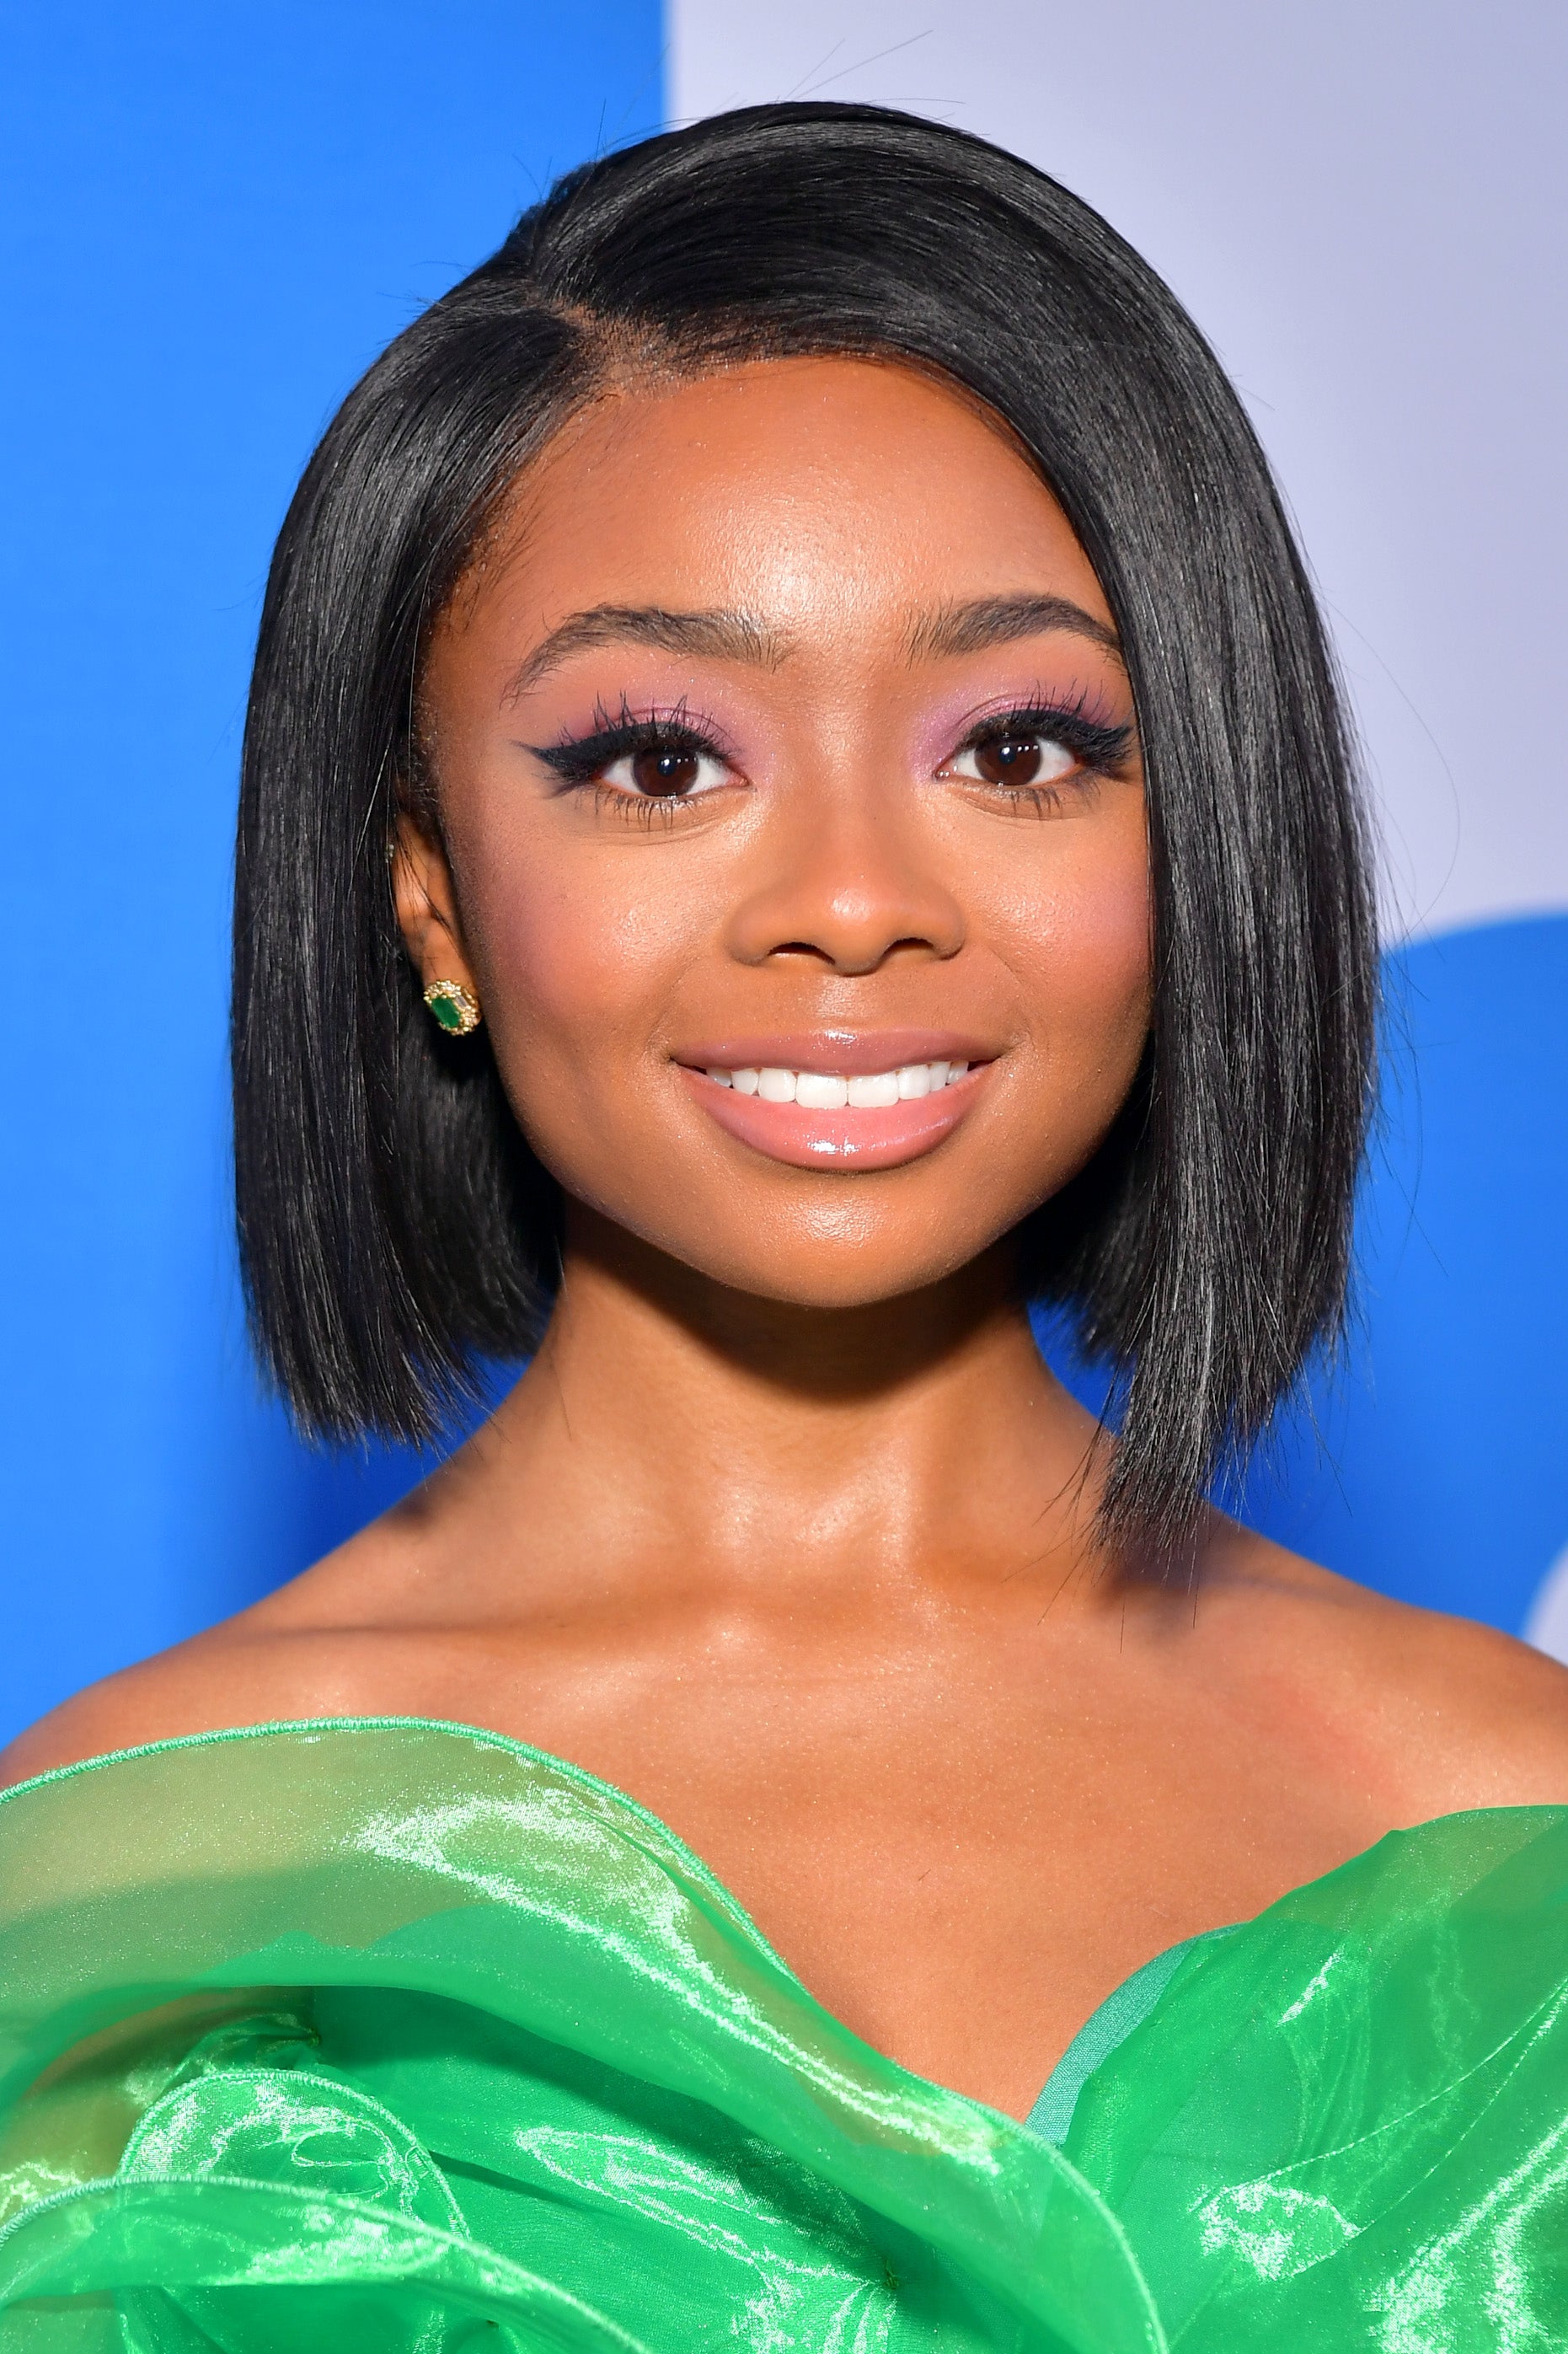 15 Beauty Moments That Made Us Want To Reach For The Skai